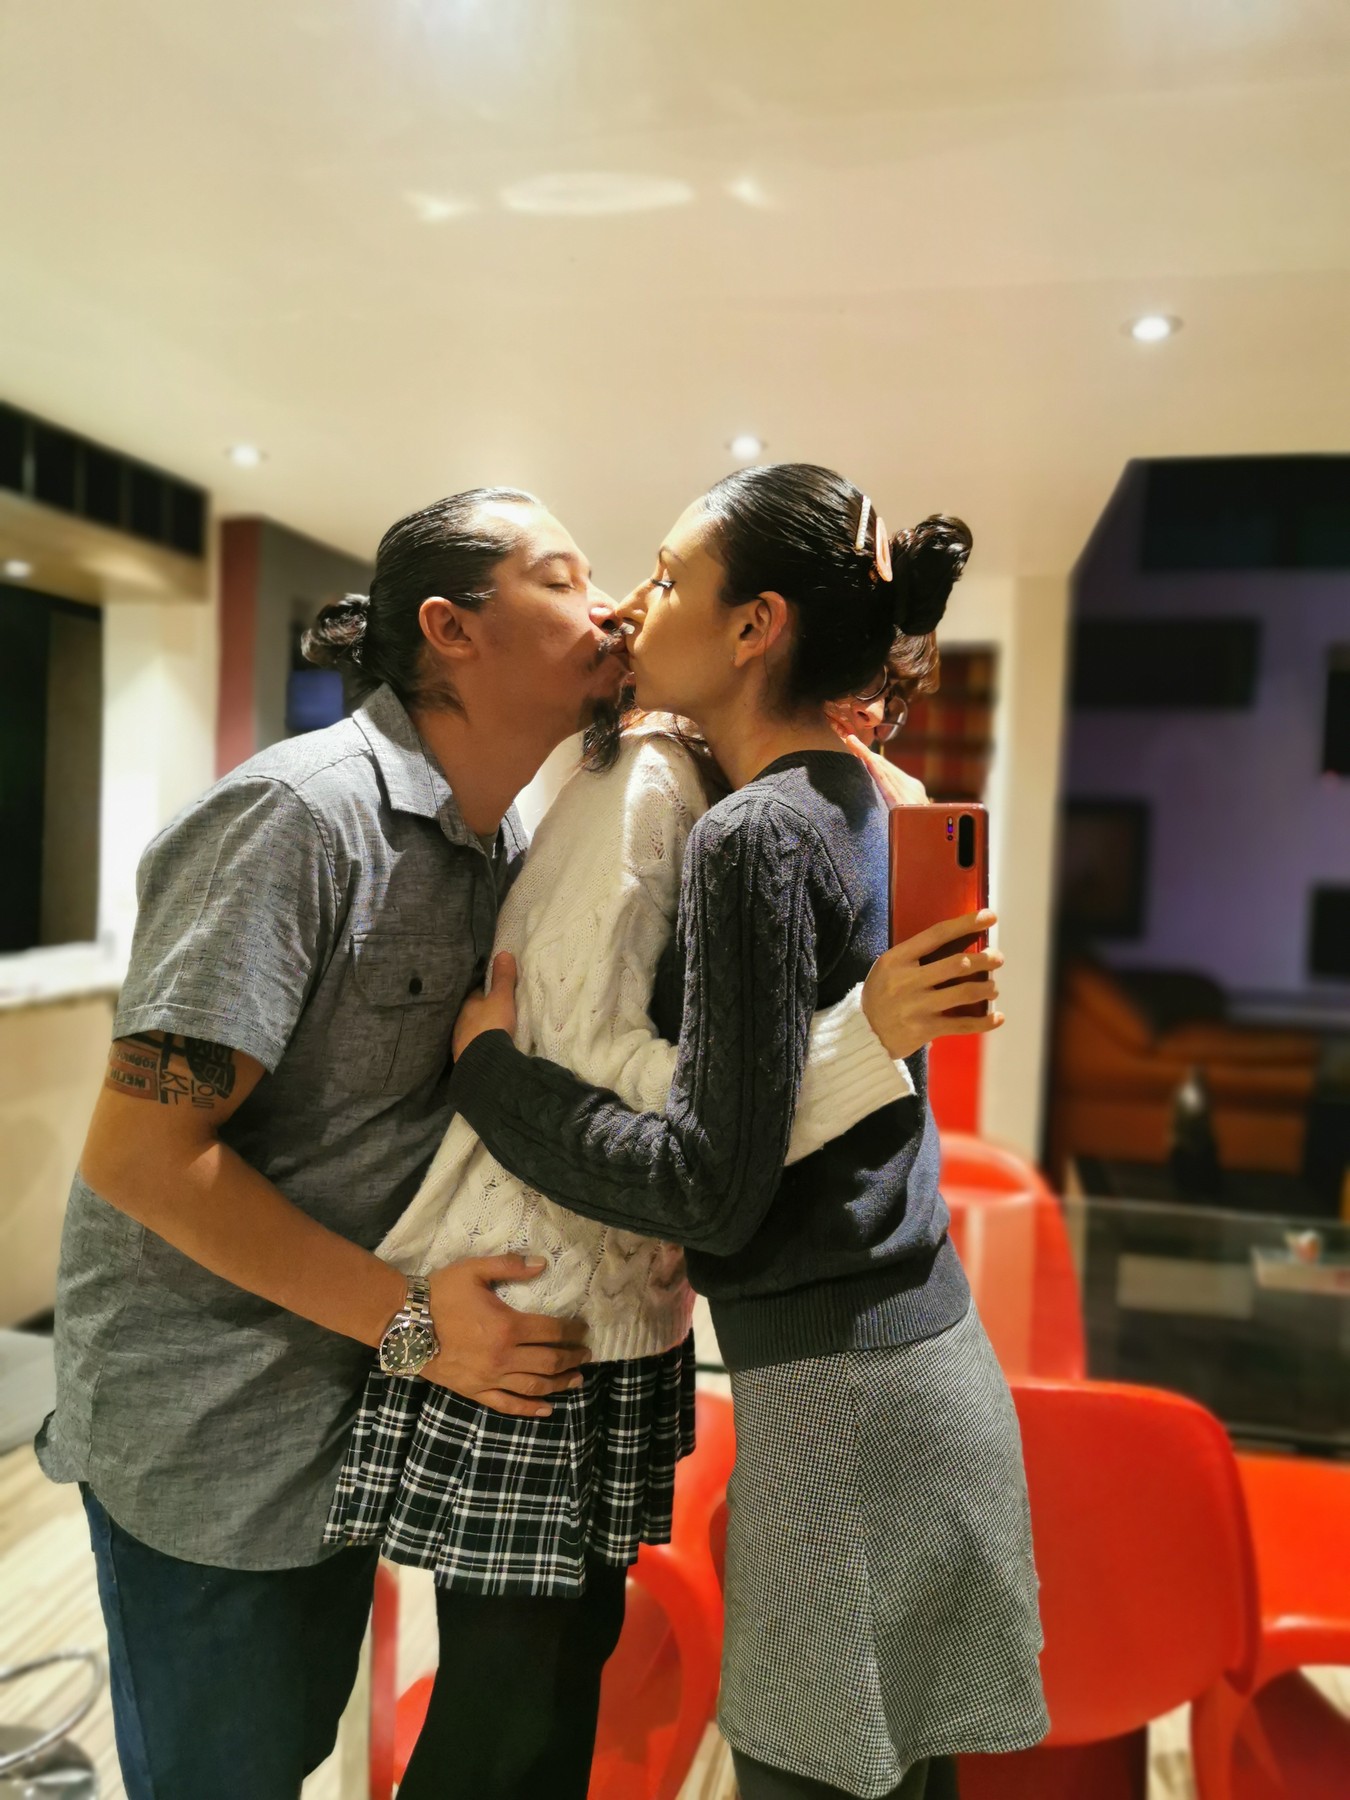 Melin hugging Lucy whilst kissing Rodrigo. MONTERREY CITY, MEXICO: THIS COUPLE married ONE WEEK AFTER THEY FIRST MET and have since invited a woman TWENTY-THREE YEARS his junior to join their relationship. On May 14, 2012, marketing entrepreneur, Rodrigo Contreras Diaz (41) from Monterrey City, Mexico, met his now wife, nutritionist, Melin Velasco Reyes (31) from Guadalajara City, through a mutual friend. Sparks flew instantly and Rodrigo ended up proposing to Melin that same day, to which she agreed. After just a week of preparations, they got married on May 21, 2012. Despite only having eyes for her, he explained to her early on in their relationship that he didn?t want a traditional monogamous relationship as he lived an alternative lifestyle and was open to a polyamorous relationship, which she accepted. For four years they focussed on their relationship then re-visited their exploration of other forms of partnerships and searched for another woman to join them in their union. On April 27, 2016, whilst they were both at a bar, they met one of the waitresses, Lucy (18), who was in high school at the time. Initially Lucy was shocked when Rodrigo began flirting with her in front of Melin, but after a few hours of chatting, they became closer and formed a polyamorous relationship. Since then, he admits that the addition of Lucy has positively improved his marriage with Melin and they now all plan to get married as a throuple, although Melin and Lucy, who are both straight, do not have a sexual relationship. mediadrumworld.com / @trikytriad, Image: 510886266, License: Rights-managed, Restrictions: , Model Release: no, Credit line: mediadrumworld.com / @trikytriad / Media Drum World / Profimedia